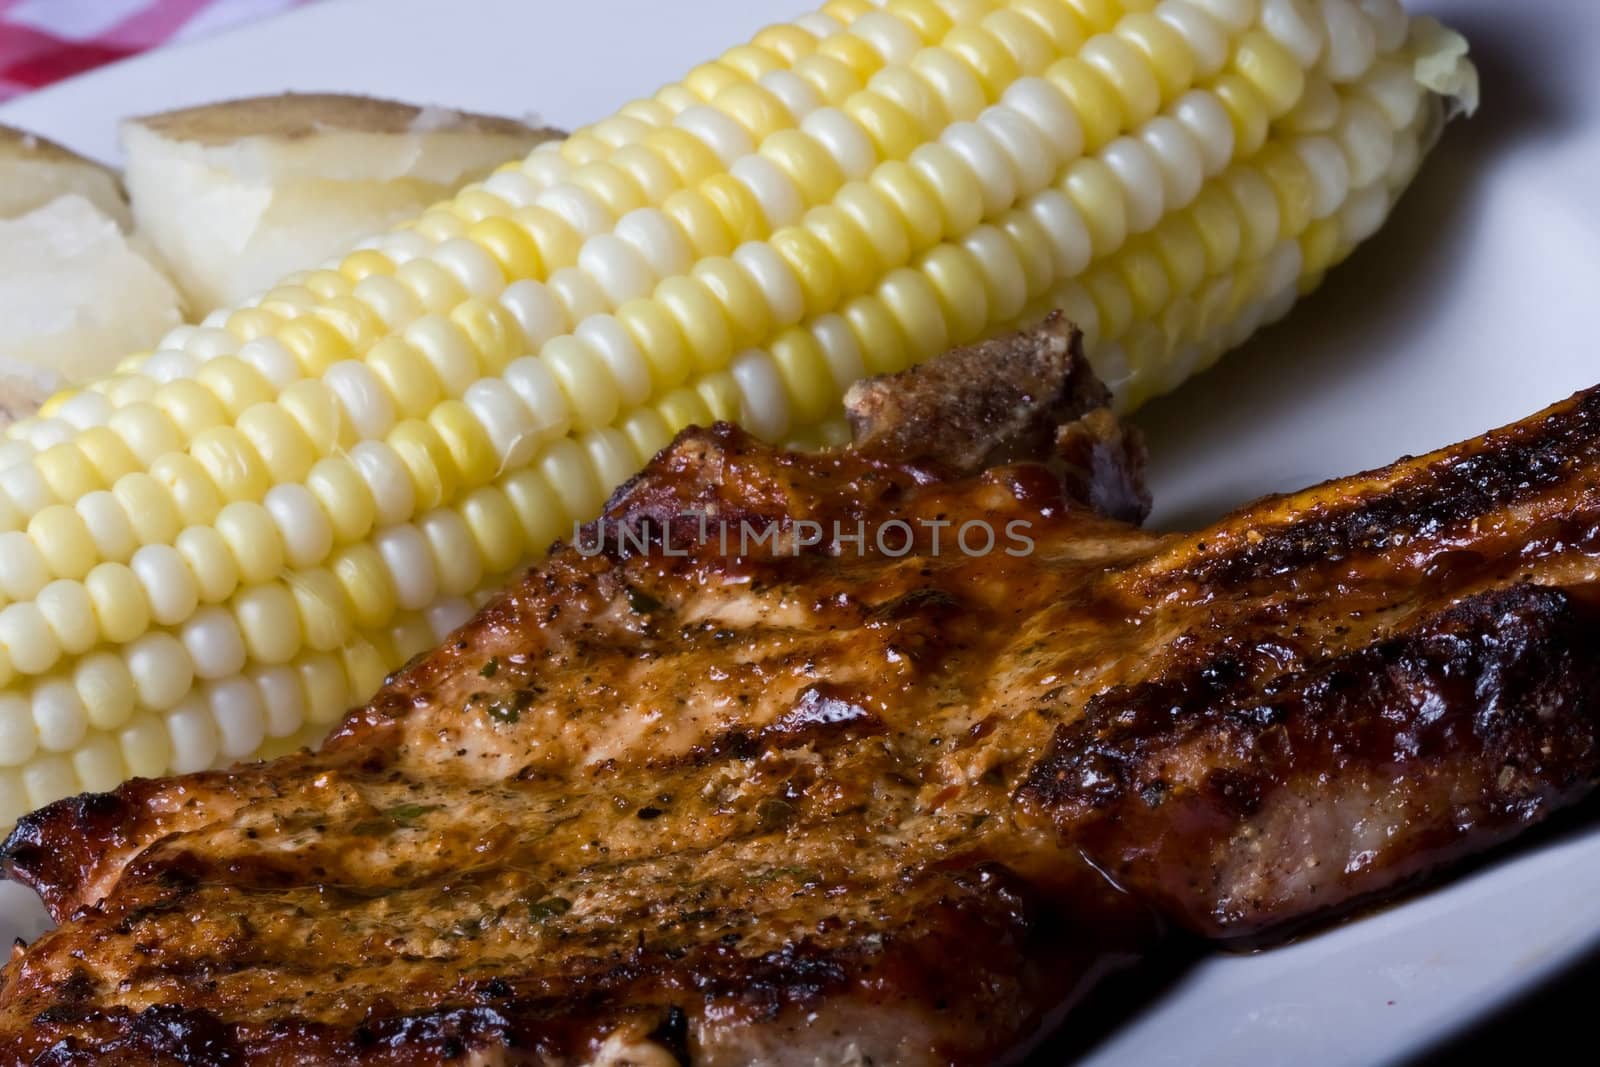 country style dinner corn on the cob on a white plate with a red checkered place mat